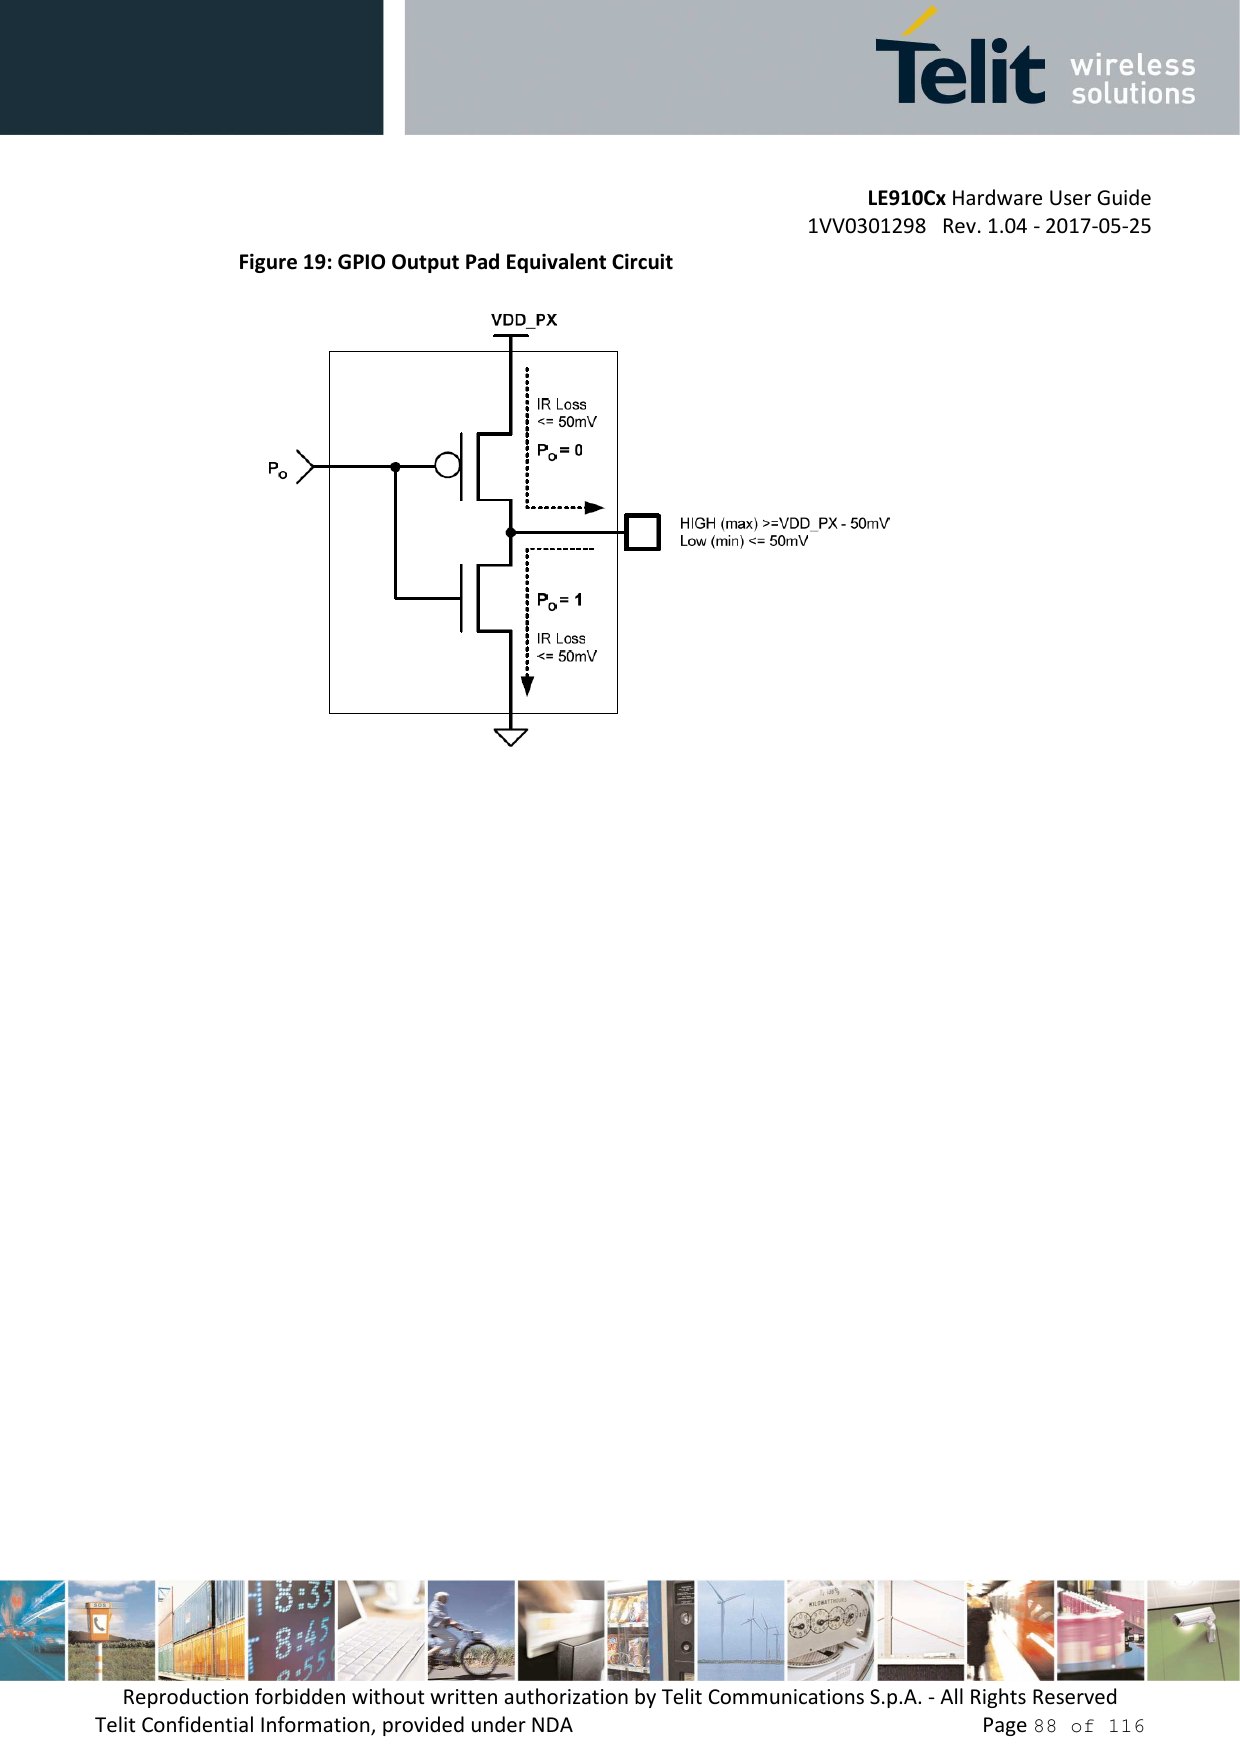         LE910Cx Hardware User Guide 1VV0301298   Rev. 1.04 - 2017-05-25 Reproduction forbidden without written authorization by Telit Communications S.p.A. - All Rights Reserved Telit Confidential Information, provided under NDA                 Page 88 of 116 Figure 19: GPIO Output Pad Equivalent Circuit  